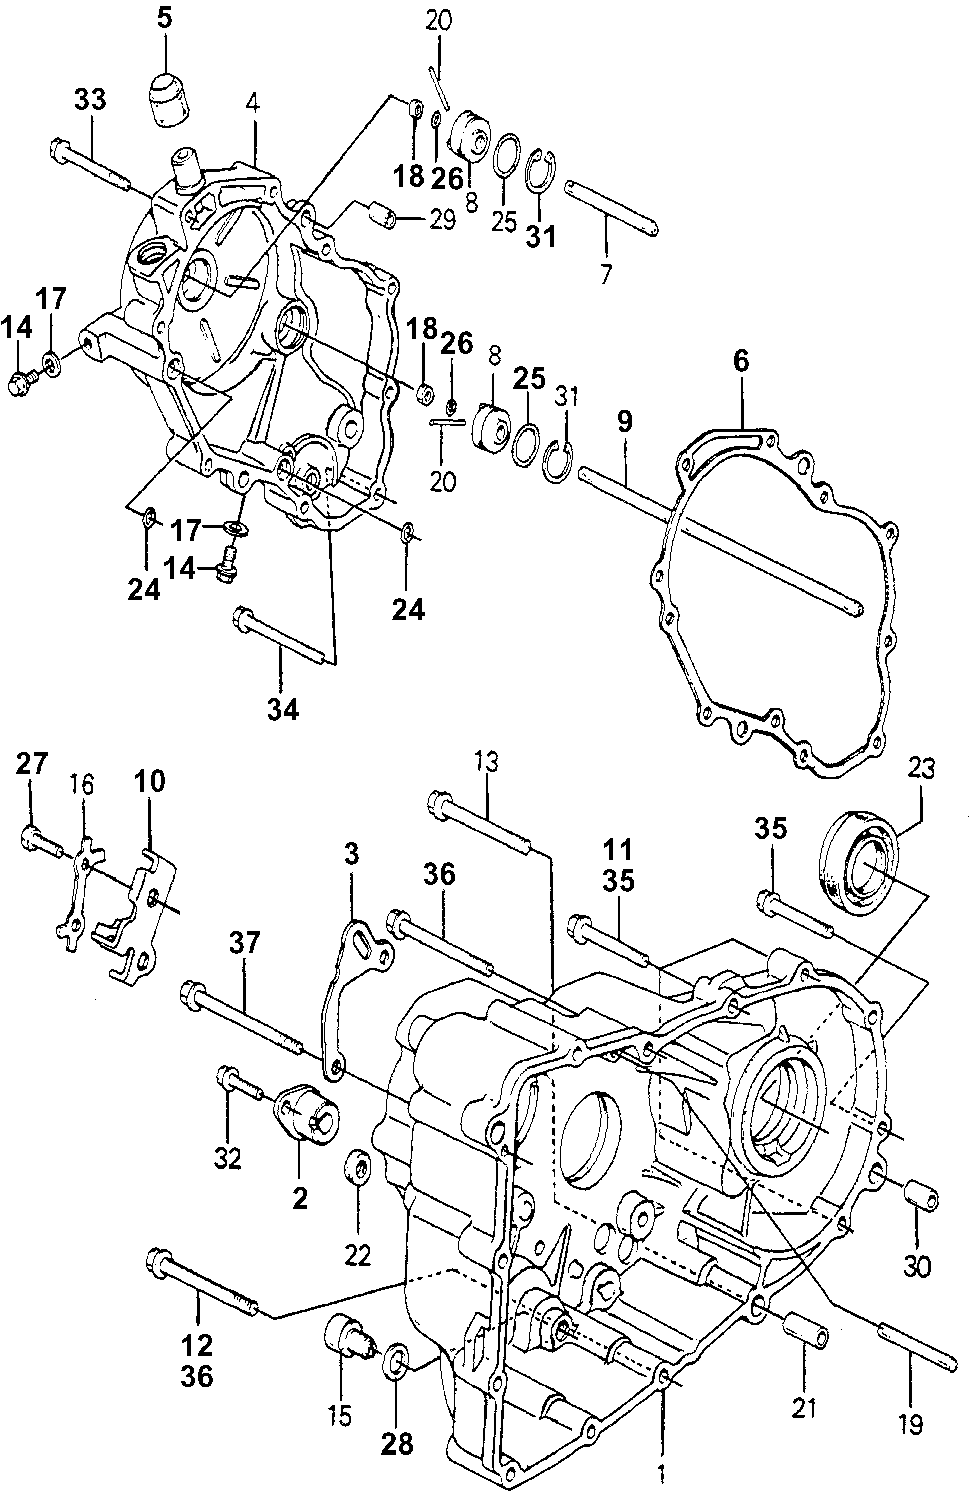 21240-PA9-010 - COVER, R. TRANSMISSION SIDE